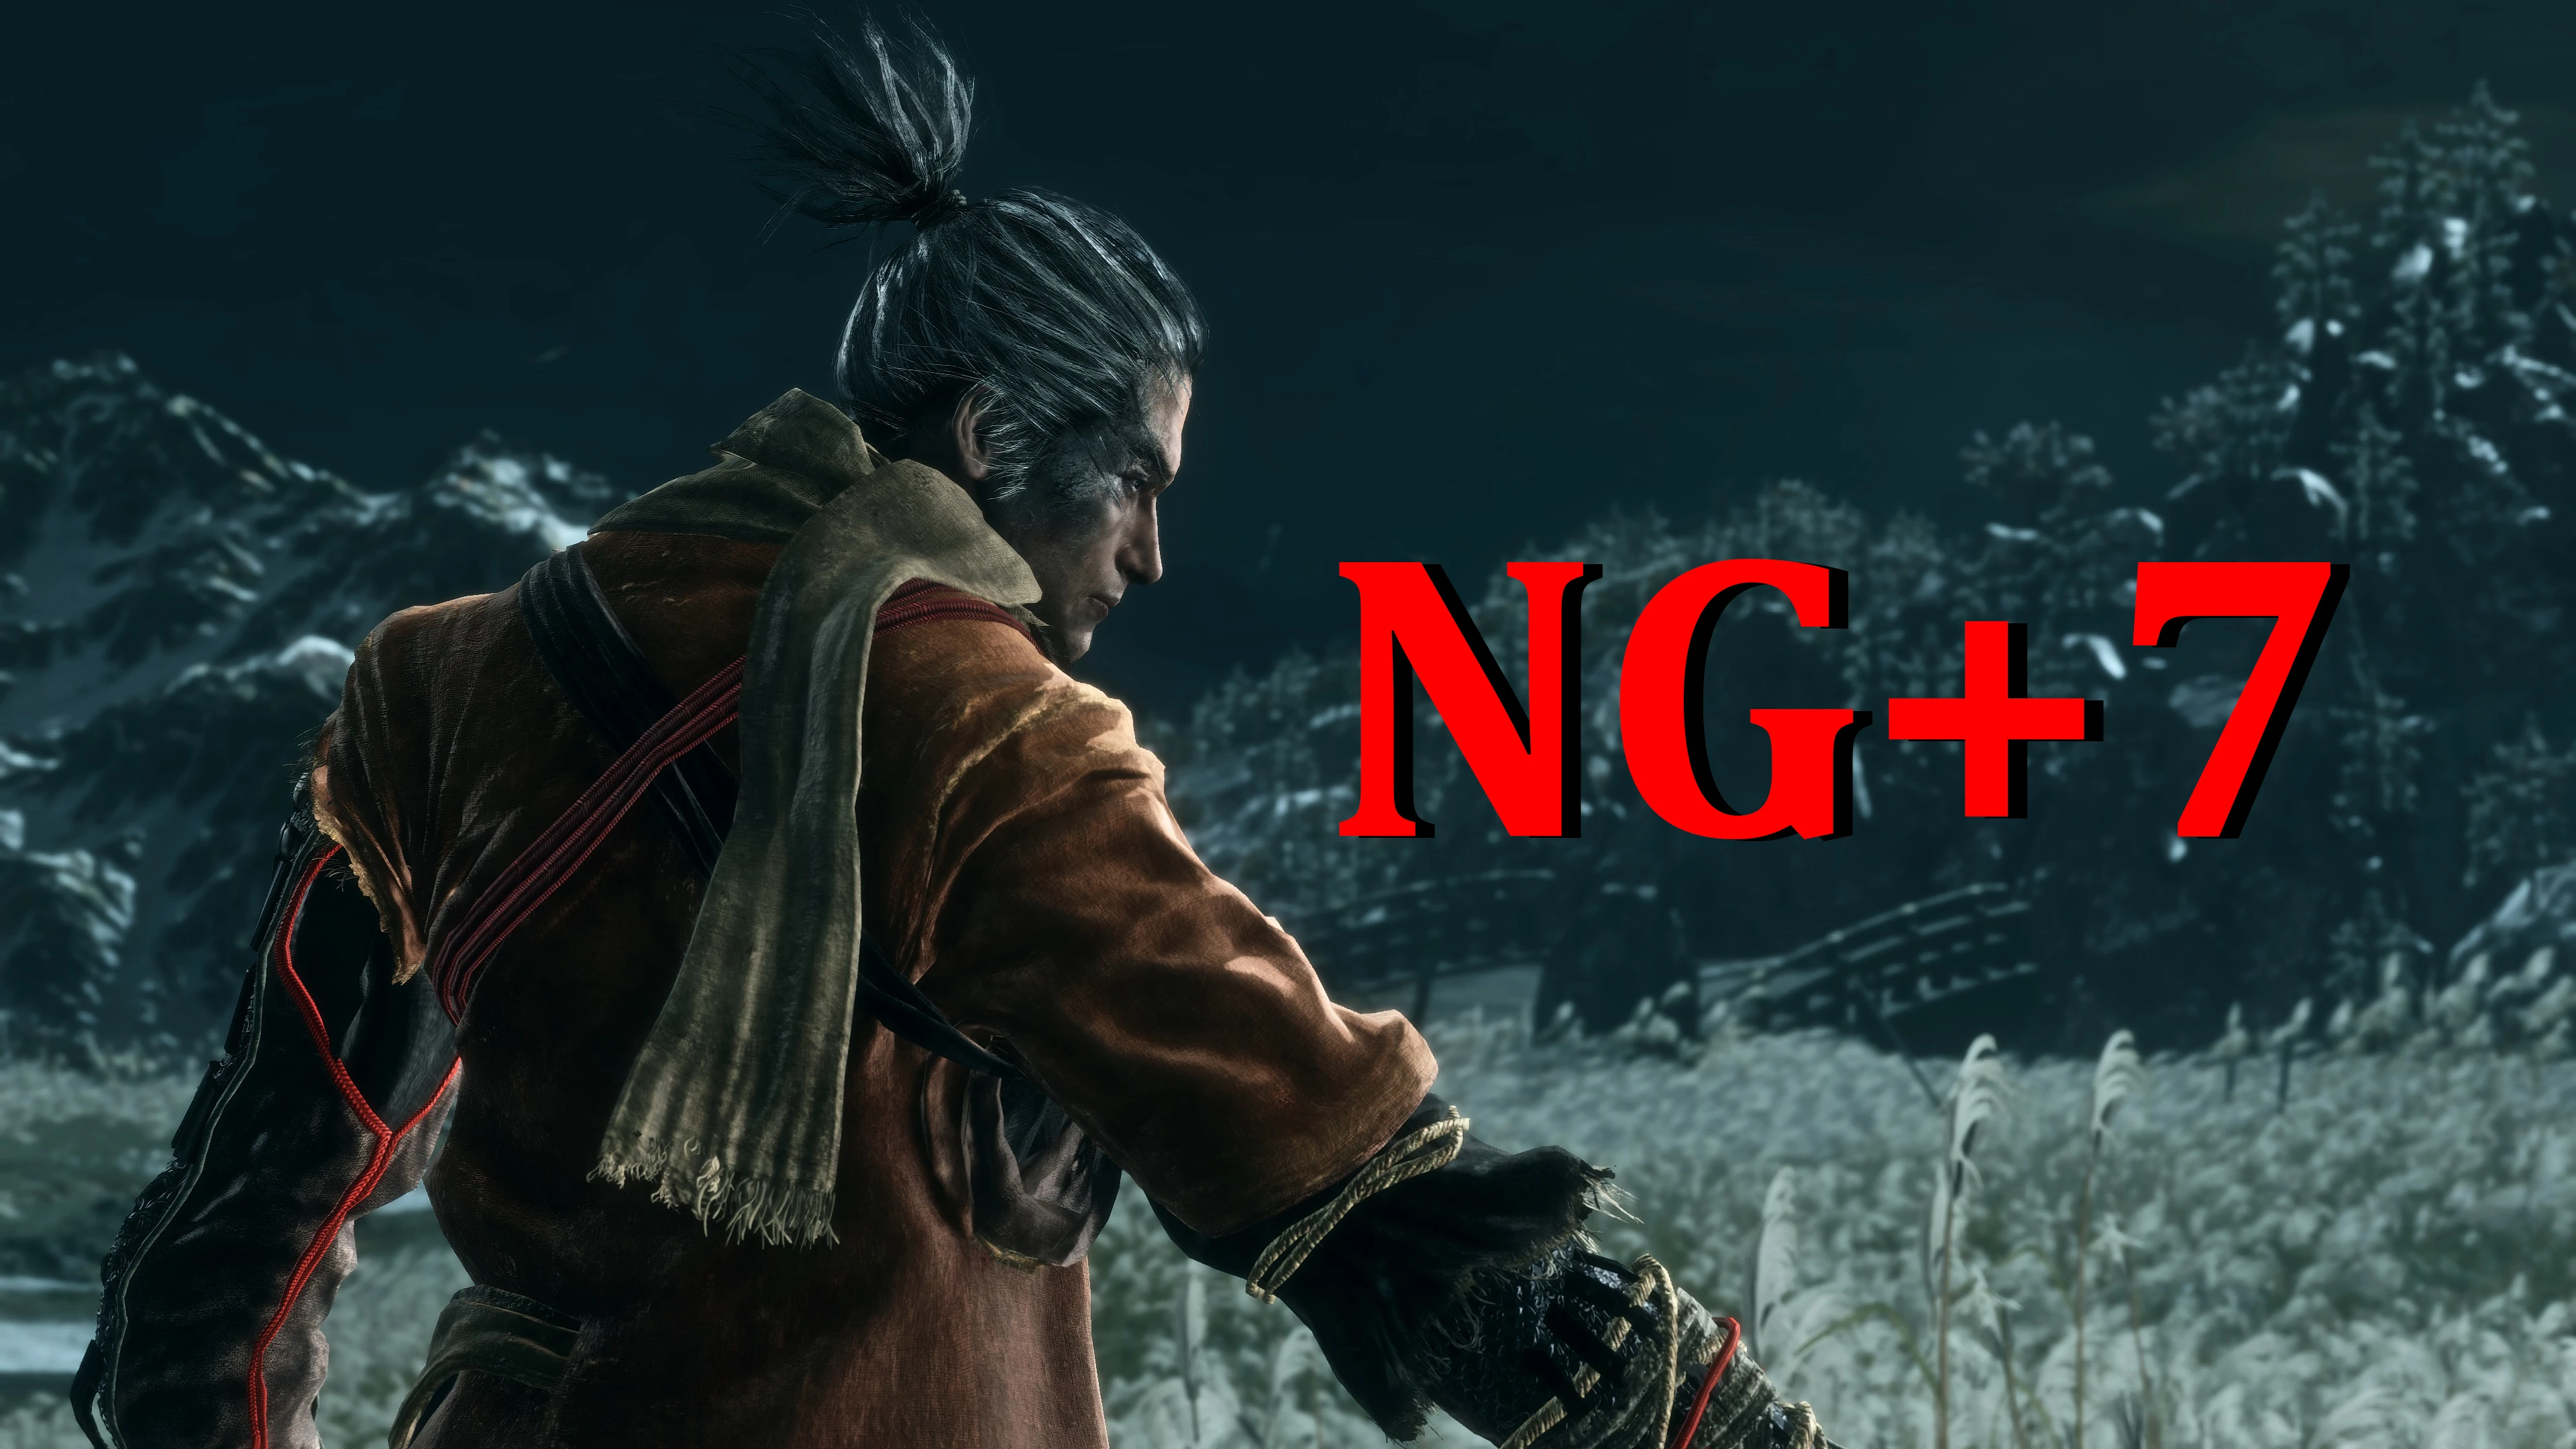 free download sekiro game of the year edition